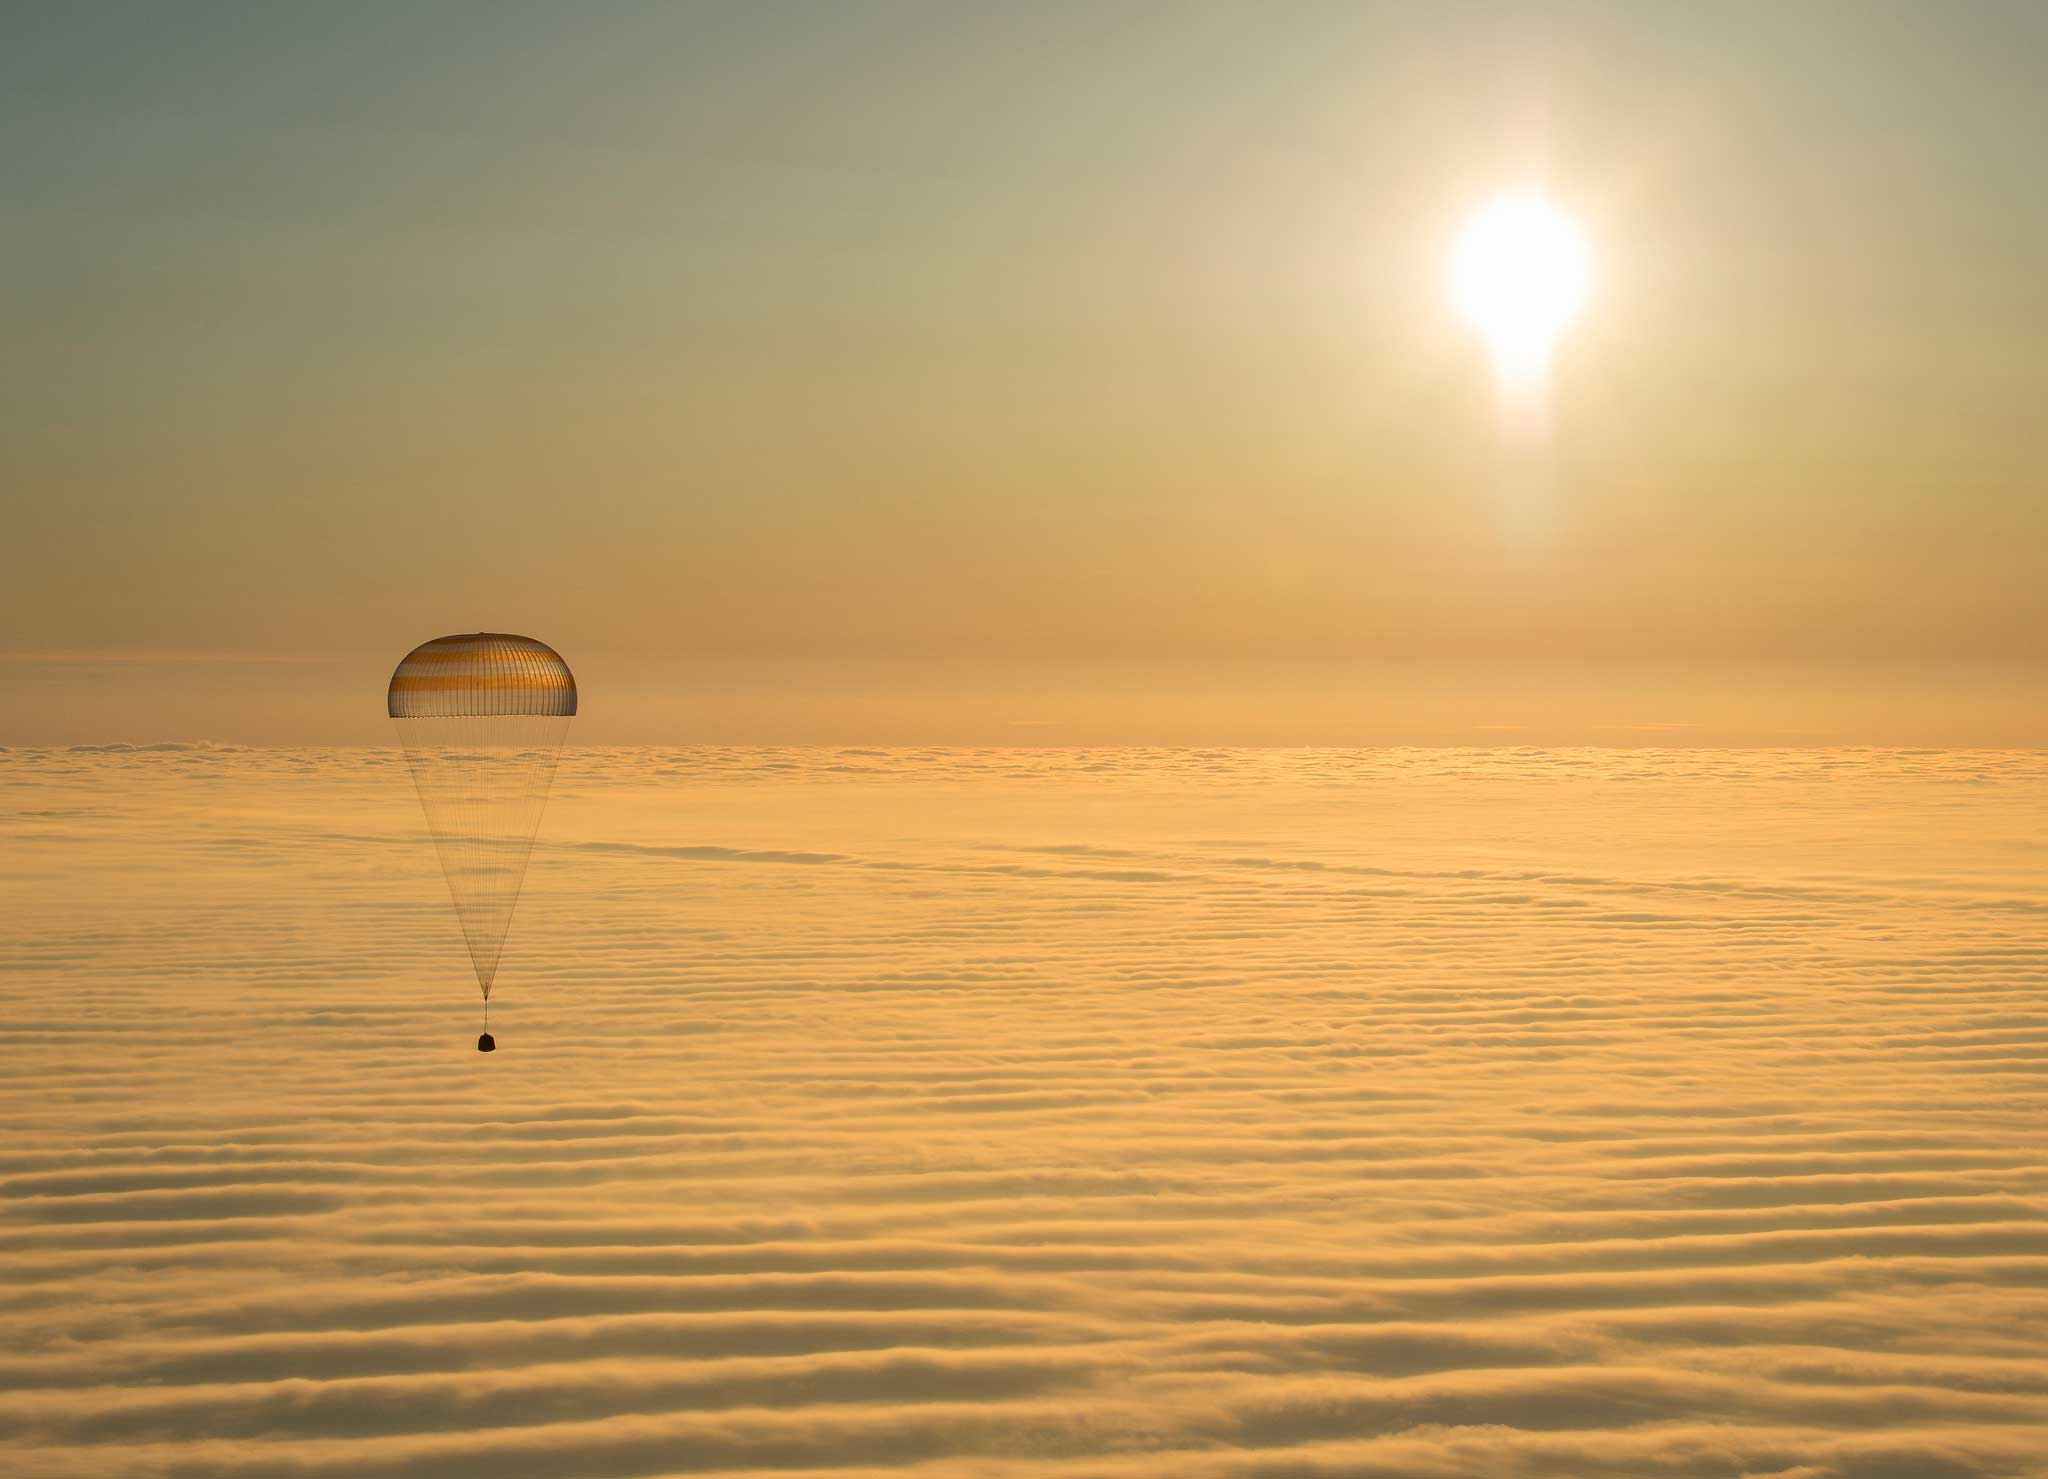 The Soyuz TMA-14M spacecraft is seen as it lands with Expedition 42 commander Barry Wilmore of NASA, Alexander Samokutyaev of the Russian Federal Space Agency (Roscosmos) and Elena Serova of Roscosmos near the town of Zhezkazgan, Kazakhstan on Thursday, March 12, 2015. NASA Astronaut Wilmore, Russian Cosmonauts Samokutyaev and Serova are returning after almost six months onboard the International Space Station where they served as members of the Expedition 41 and 42 crews. Photo Credit: (NASA/Bill Ingalls)